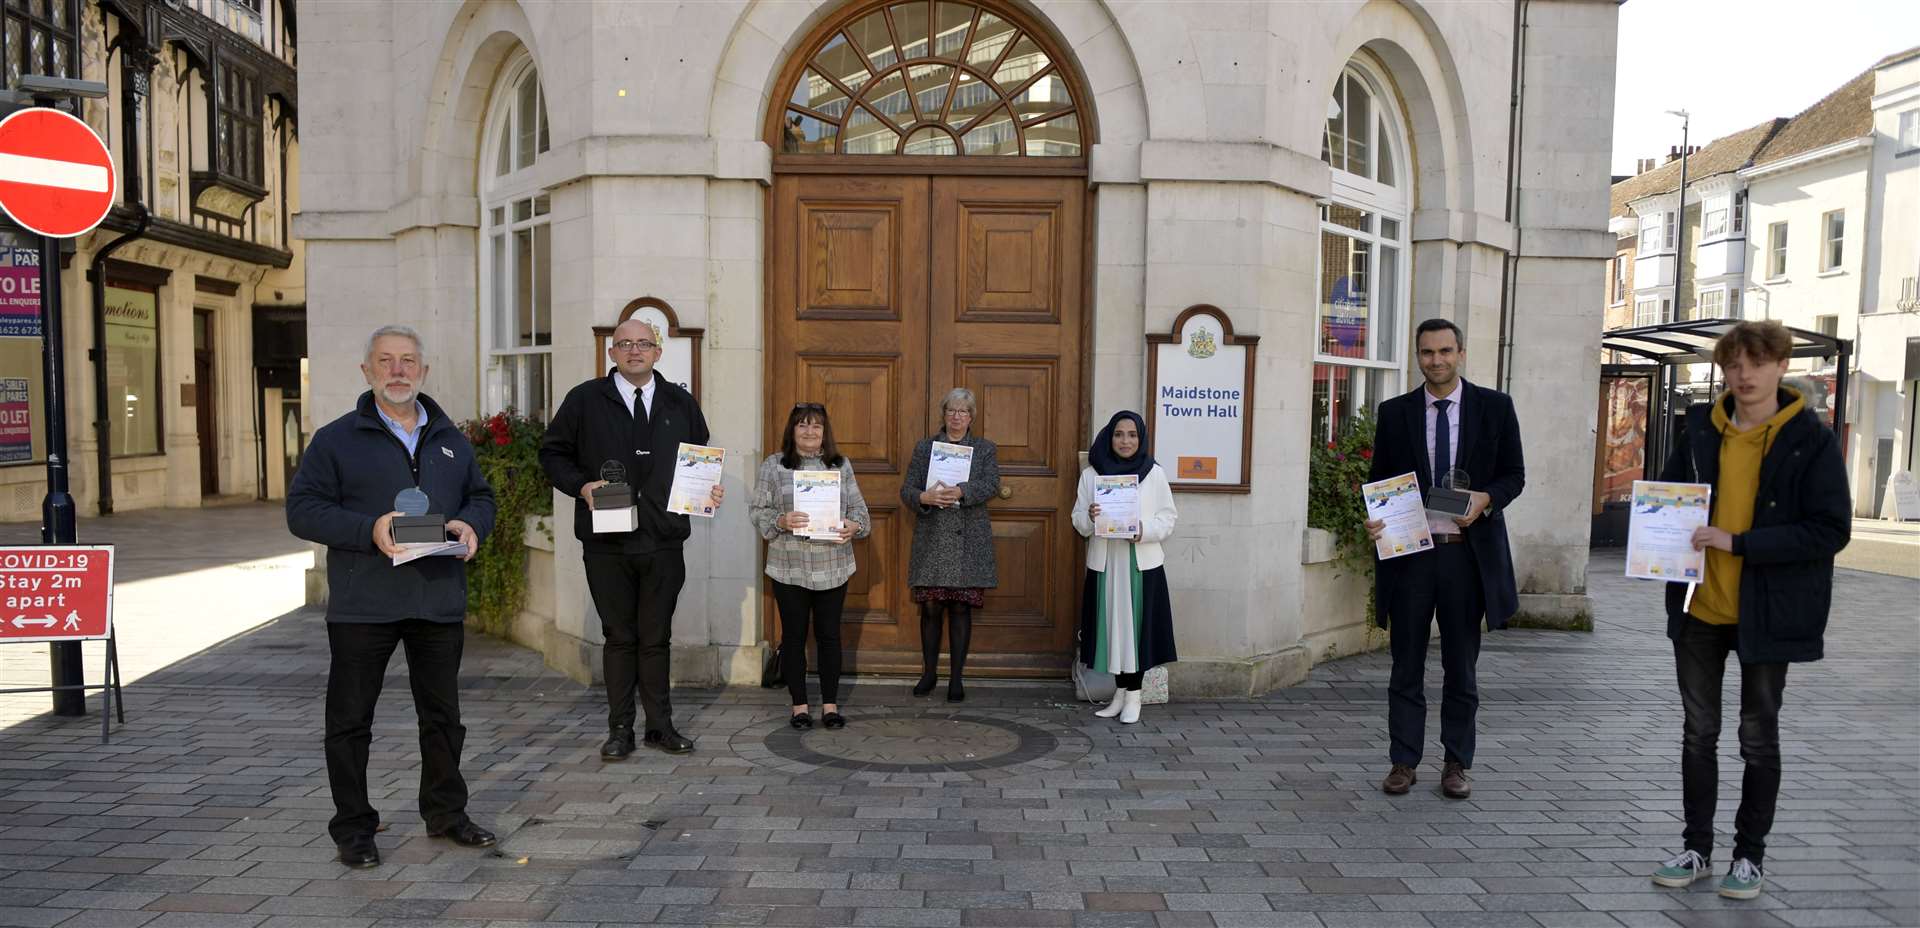 Last year's winners were honoured at a ceremony in Maidstone Town Hall. Picture: Barry Goodwin